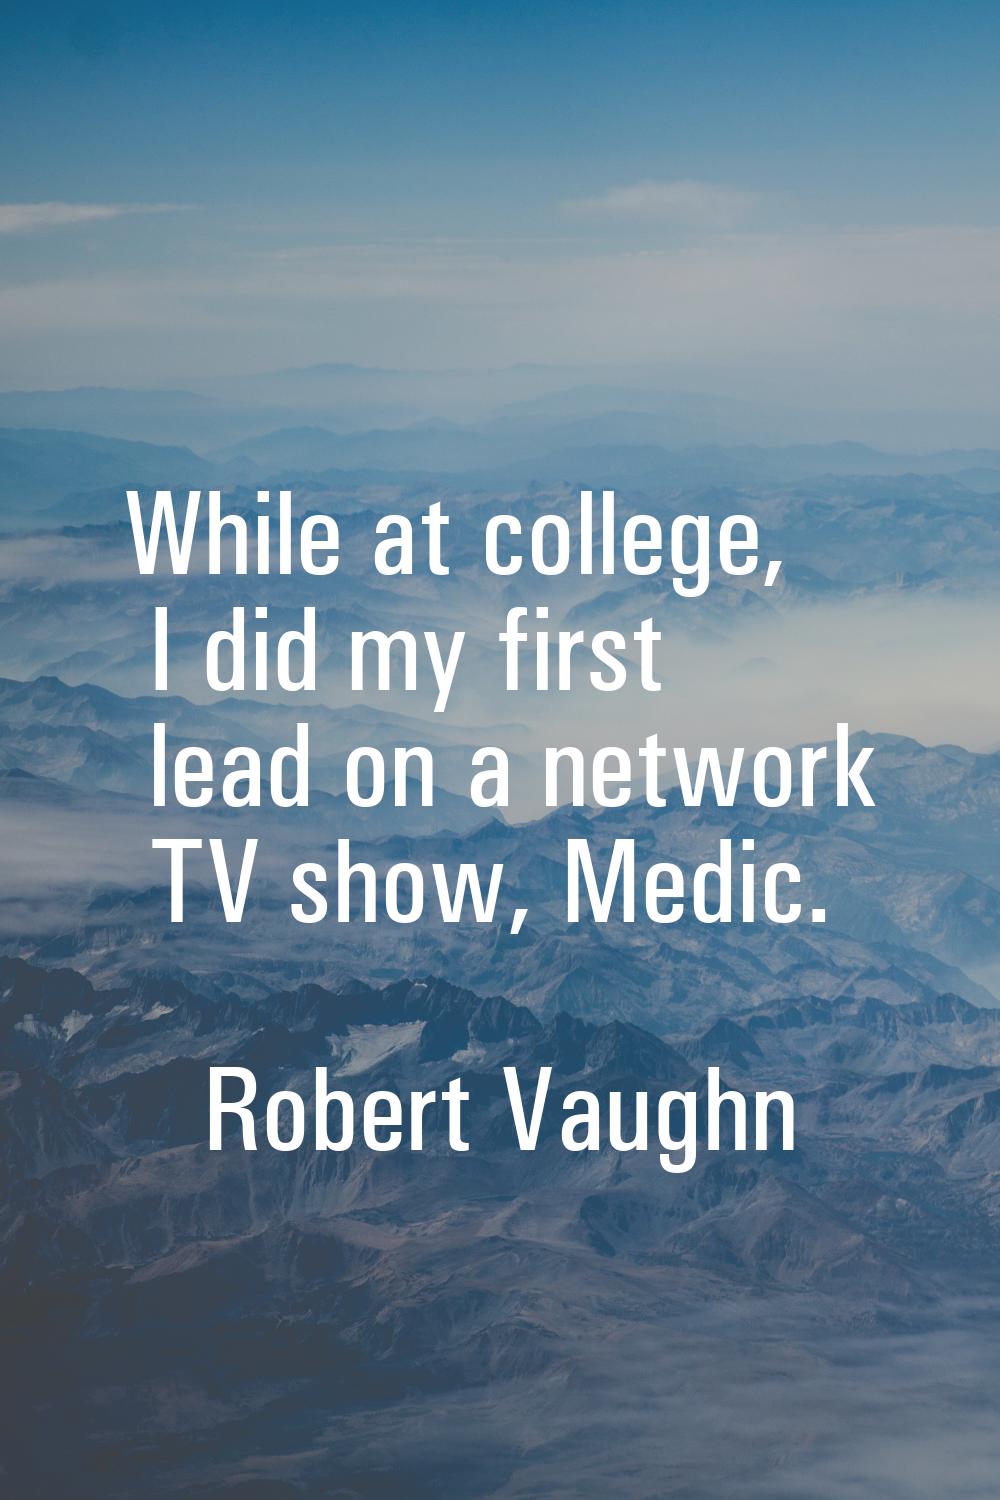 While at college, I did my first lead on a network TV show, Medic.